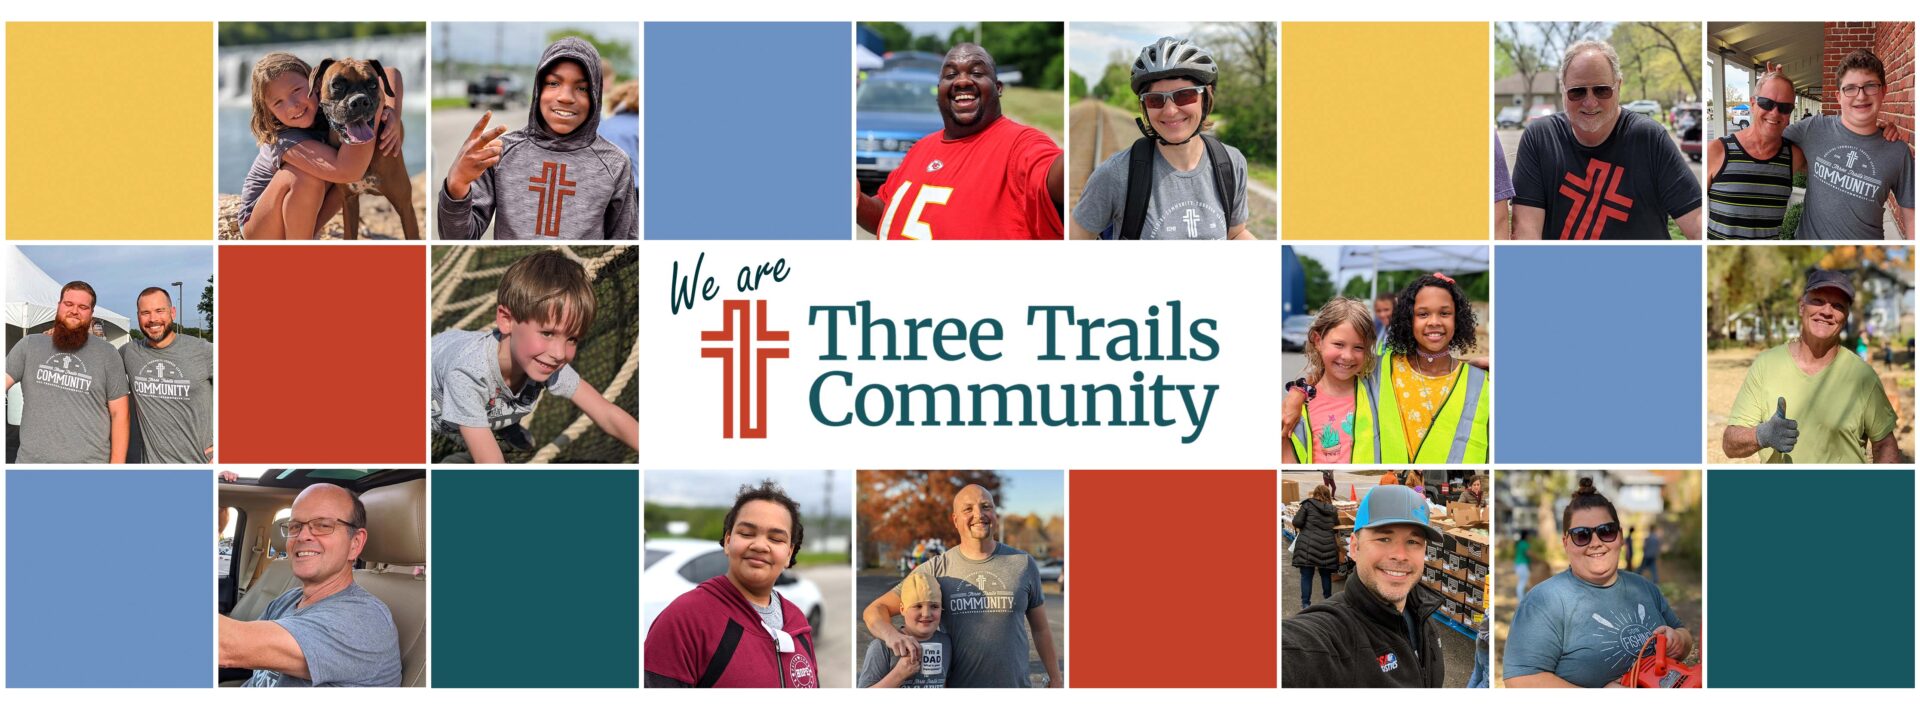 The cover image of three trails community